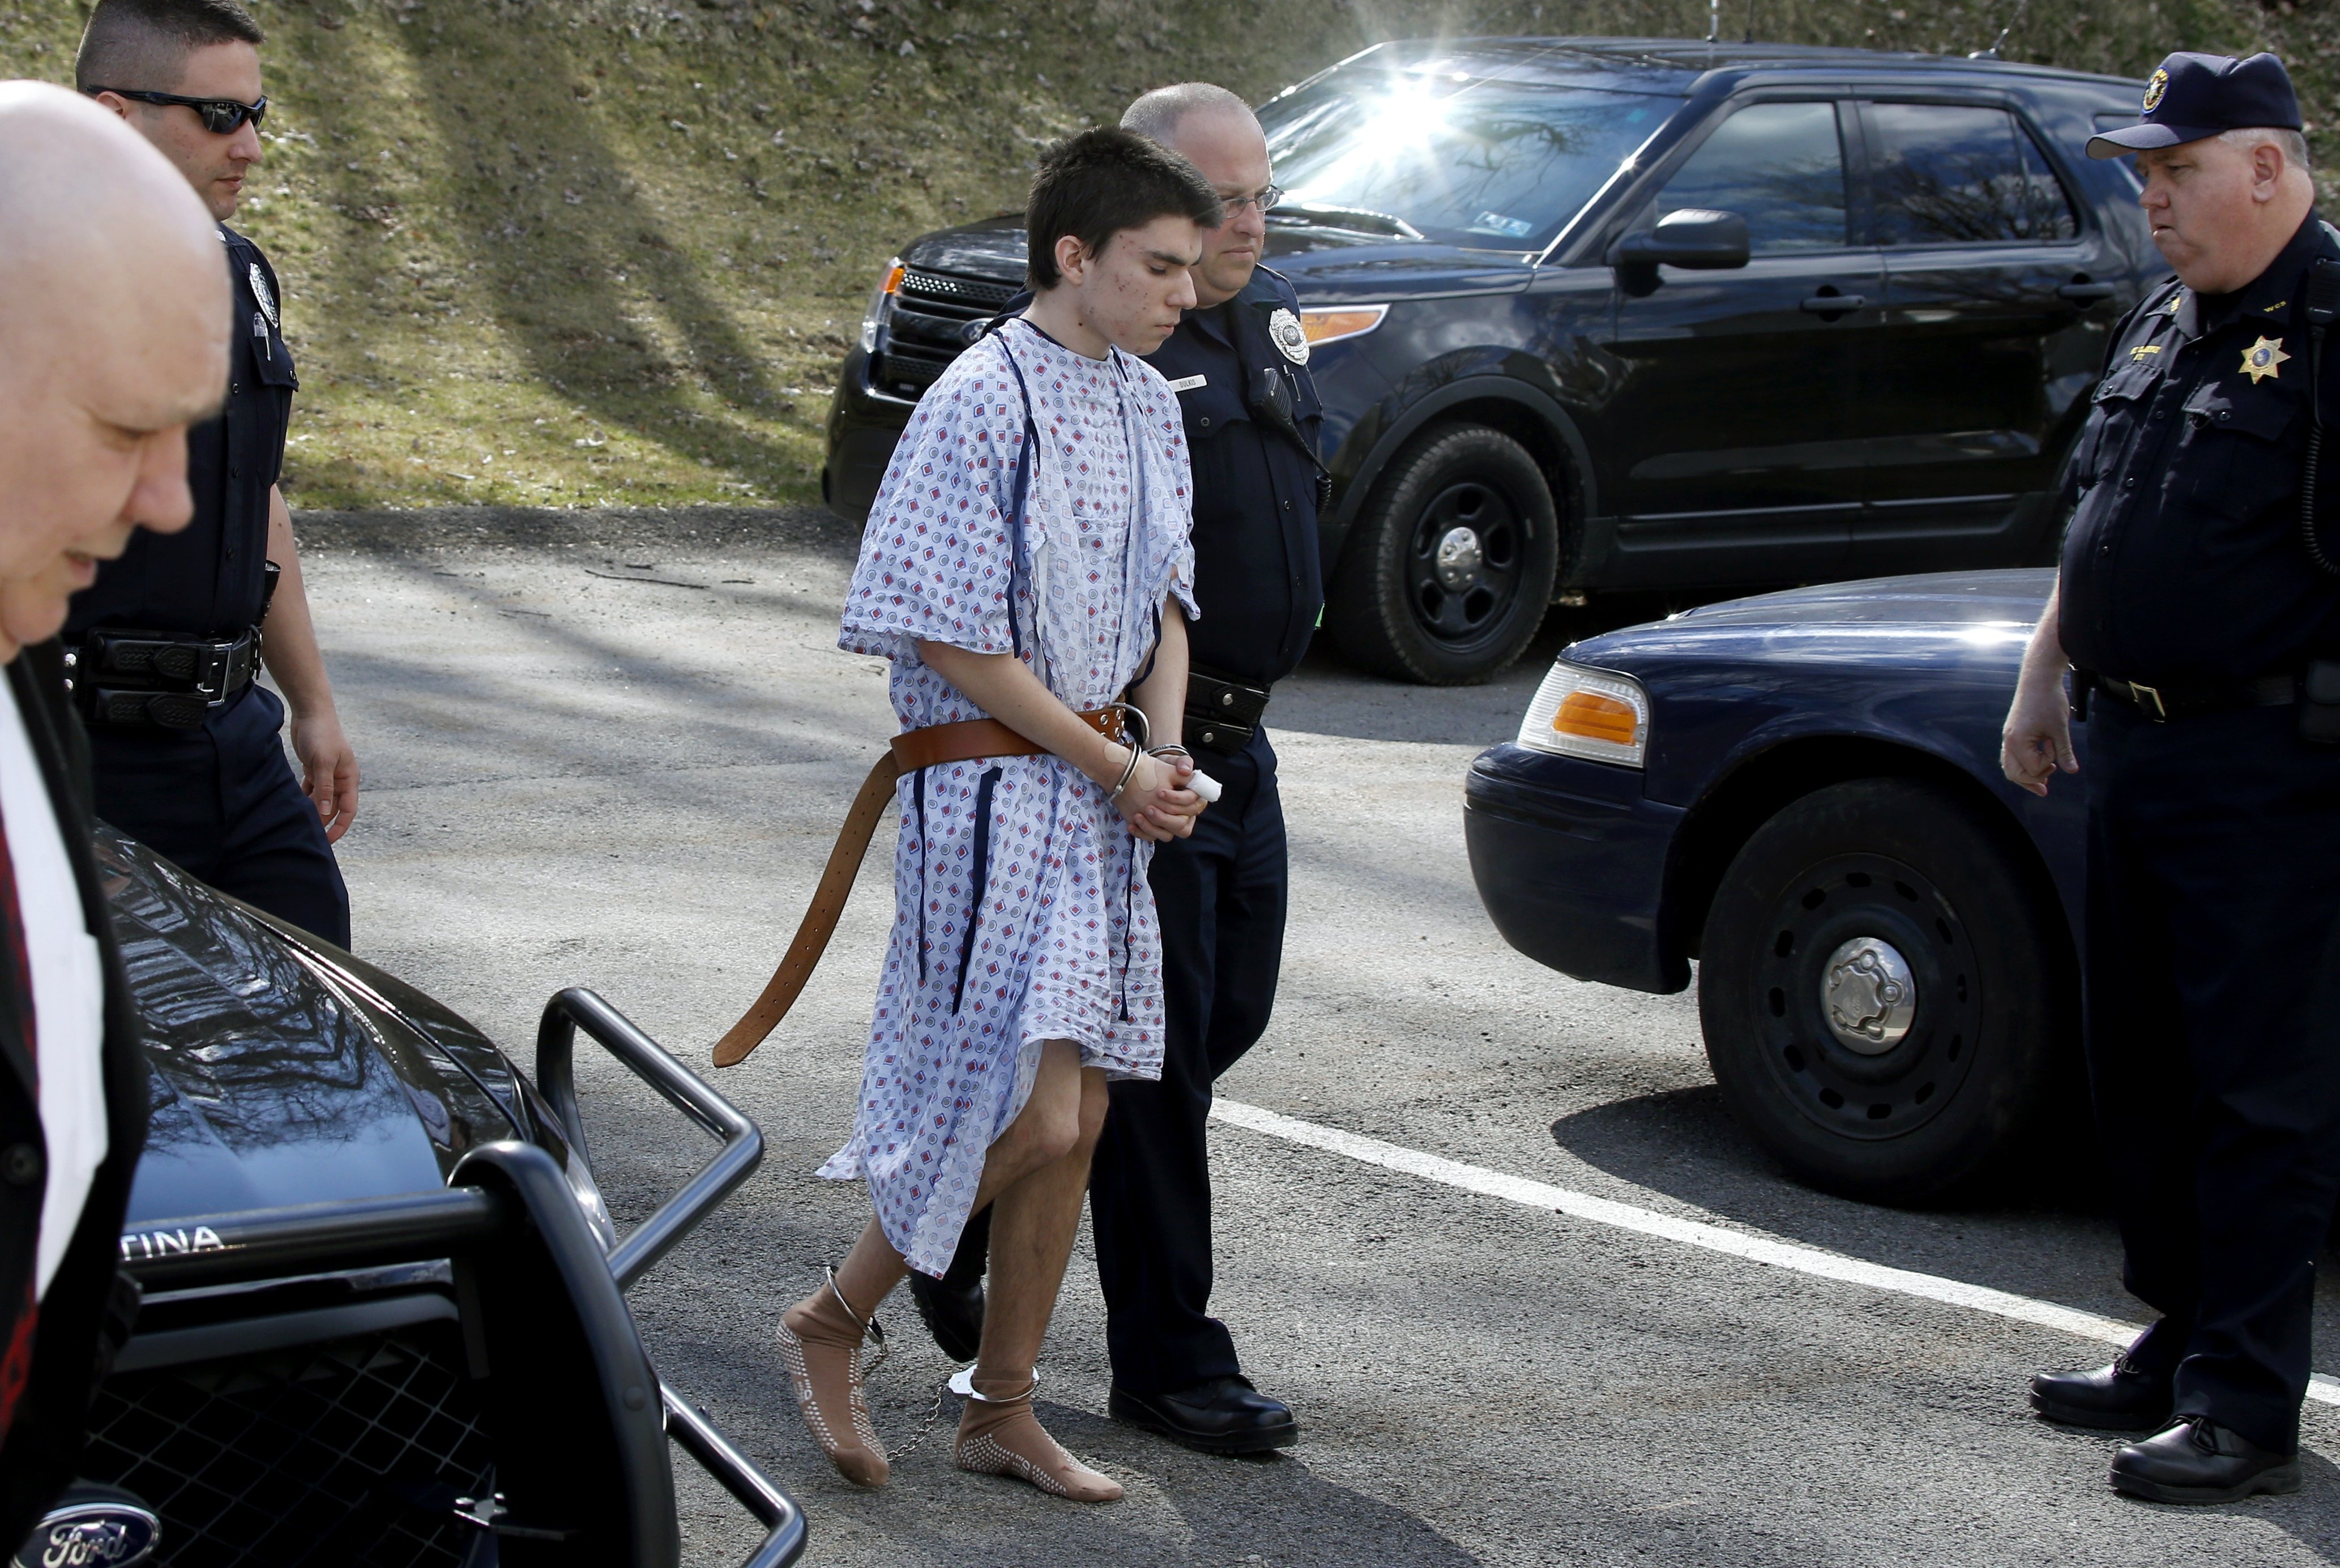 Alex Hribal, the suspect in the multiple stabbings at the Franklin Regional High School in Murrysville, Pa., is escorted by police to a district magistrate to be arraigned in Export, Pa.